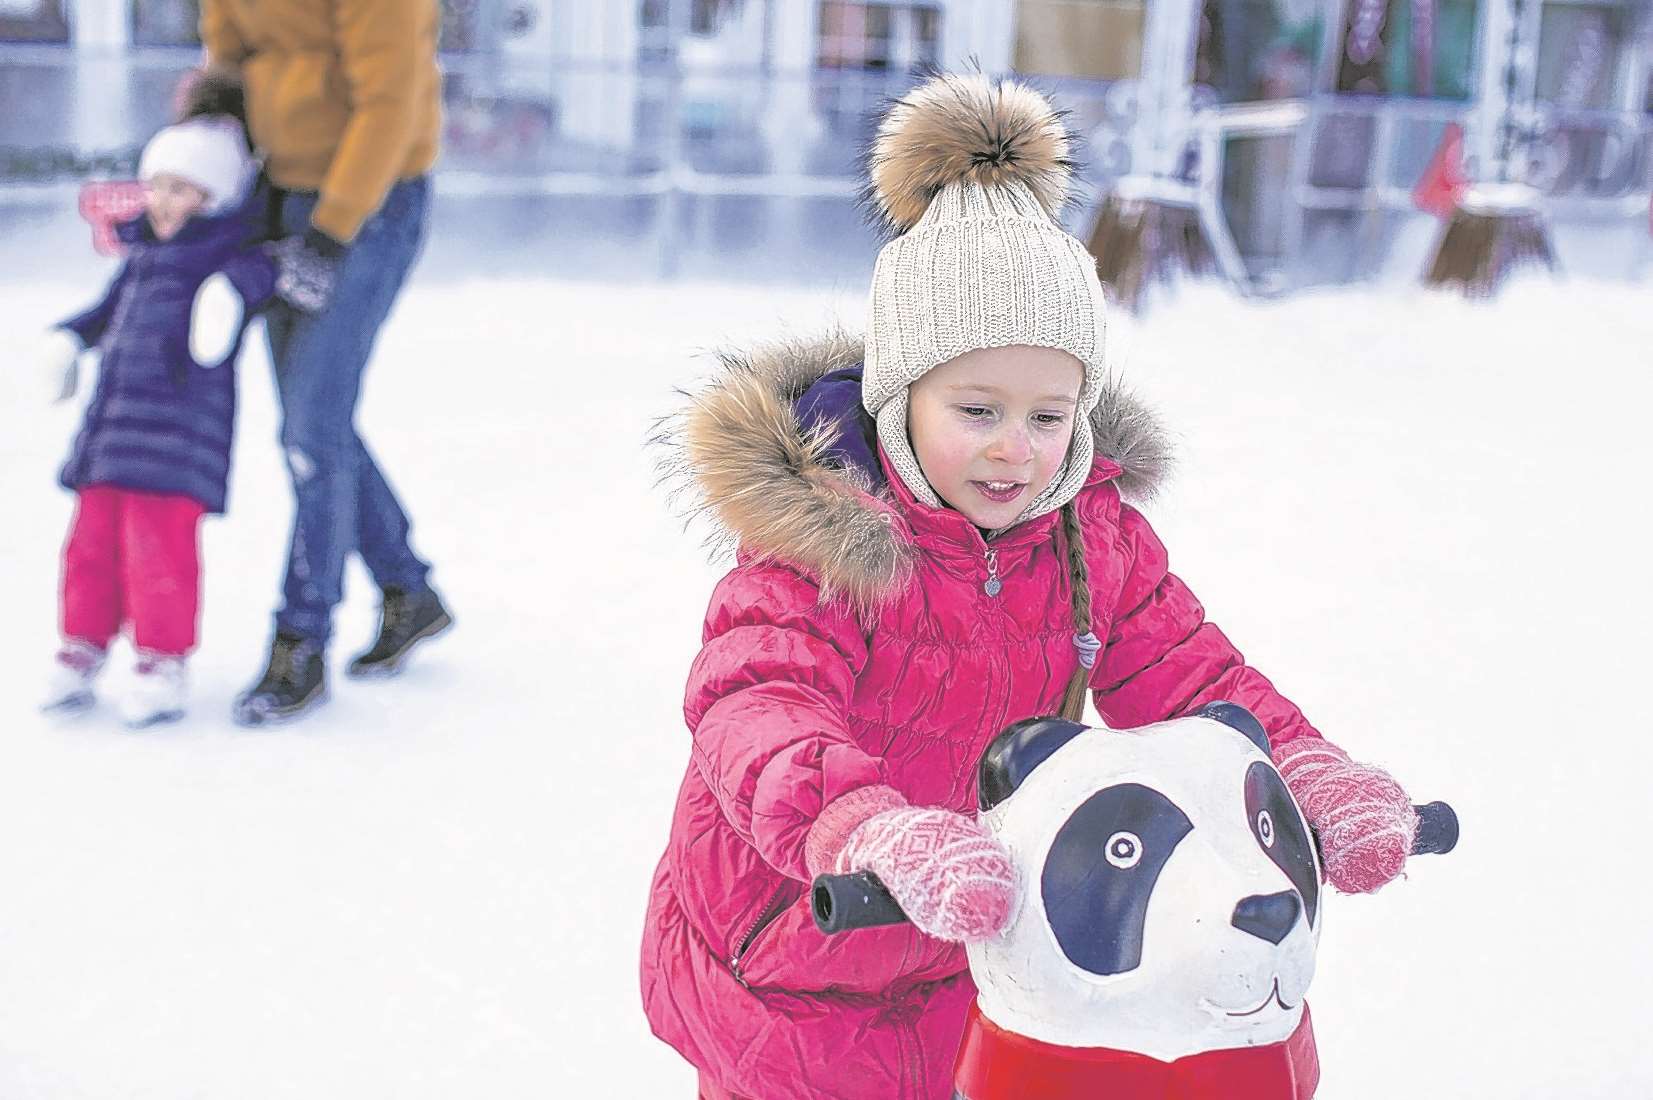 Try ice skating in Tunbridge Wells this Christmas